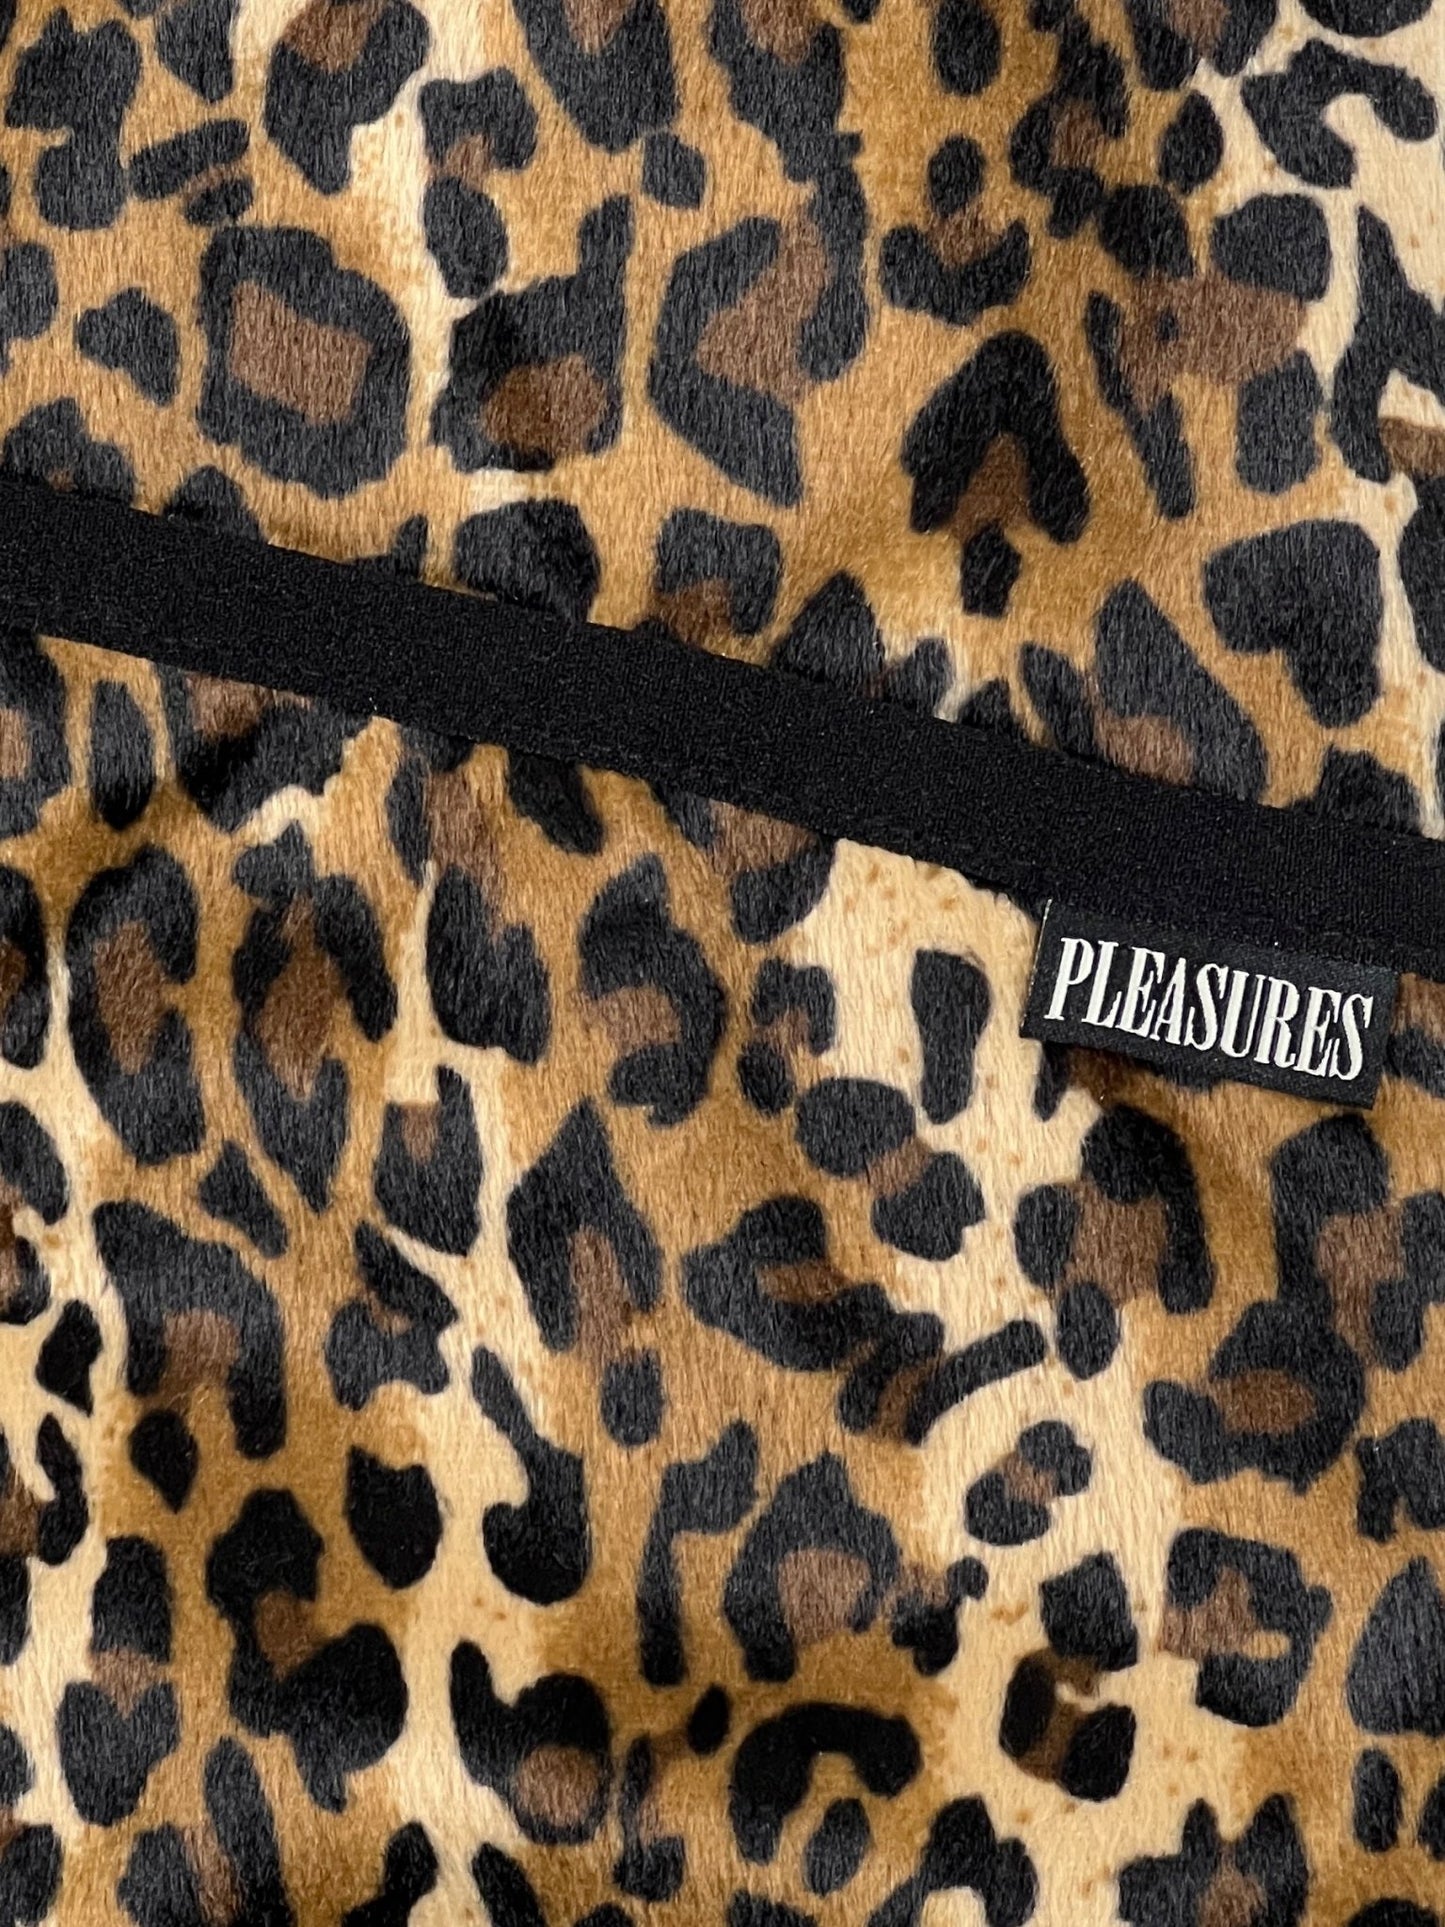 A close up of a PLEASURES cheetah print polyester scarf.